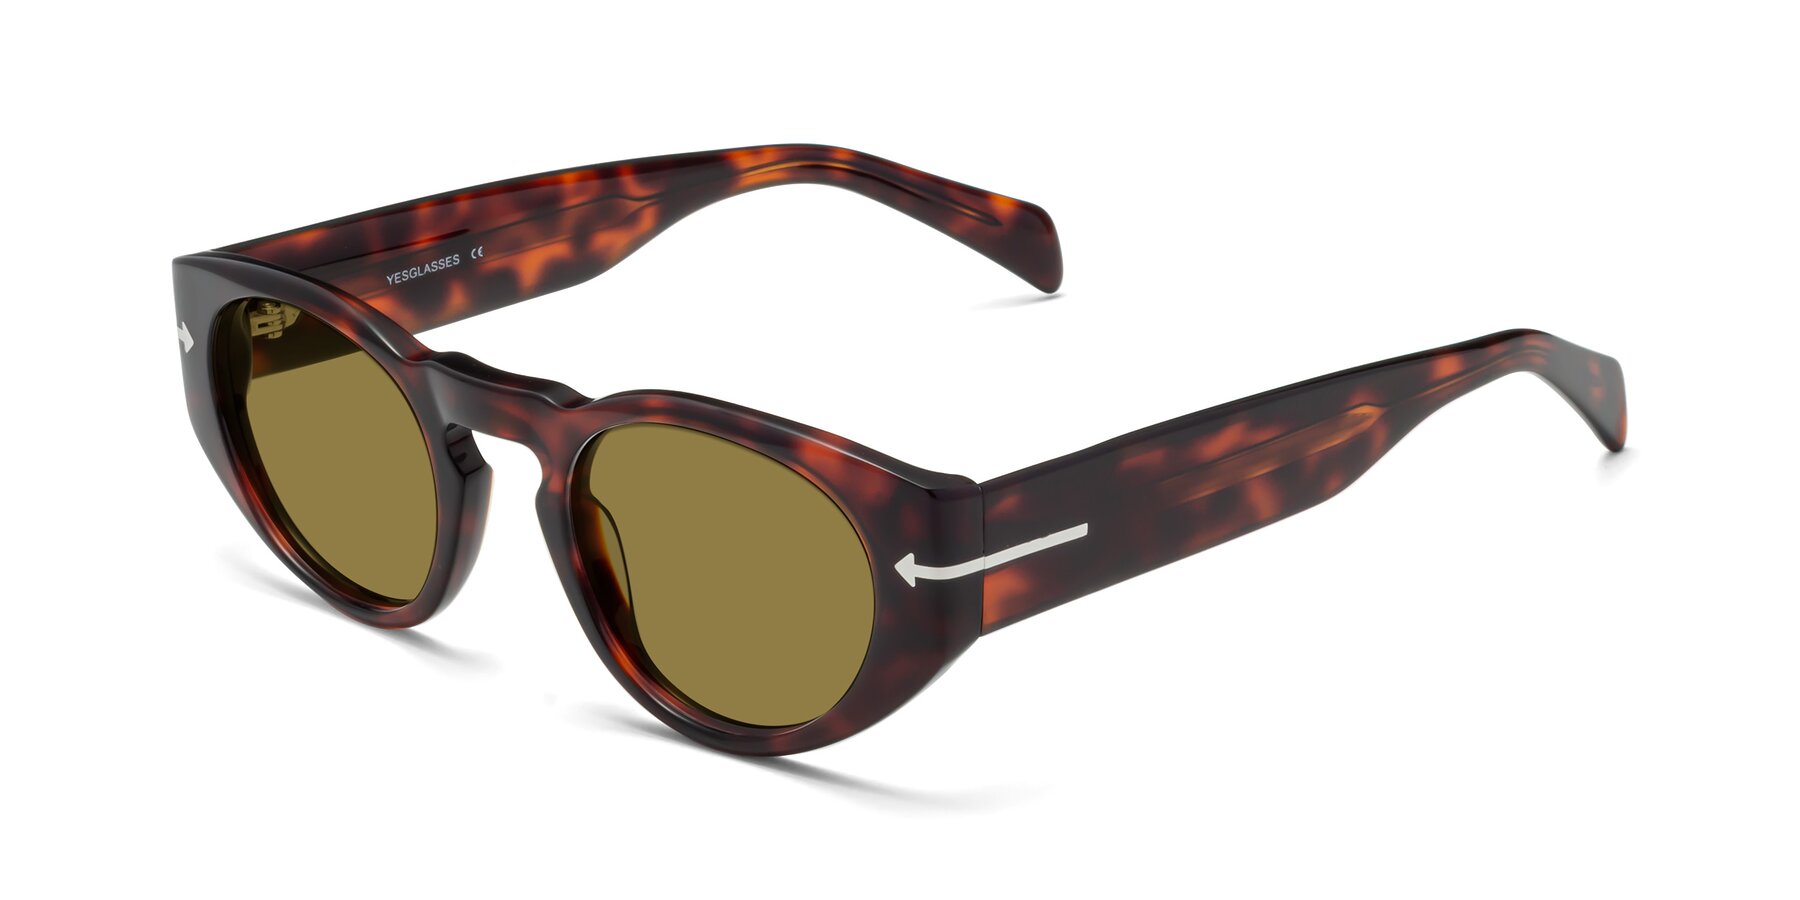 Angle of 1578 in Tortoise with Brown Polarized Lenses